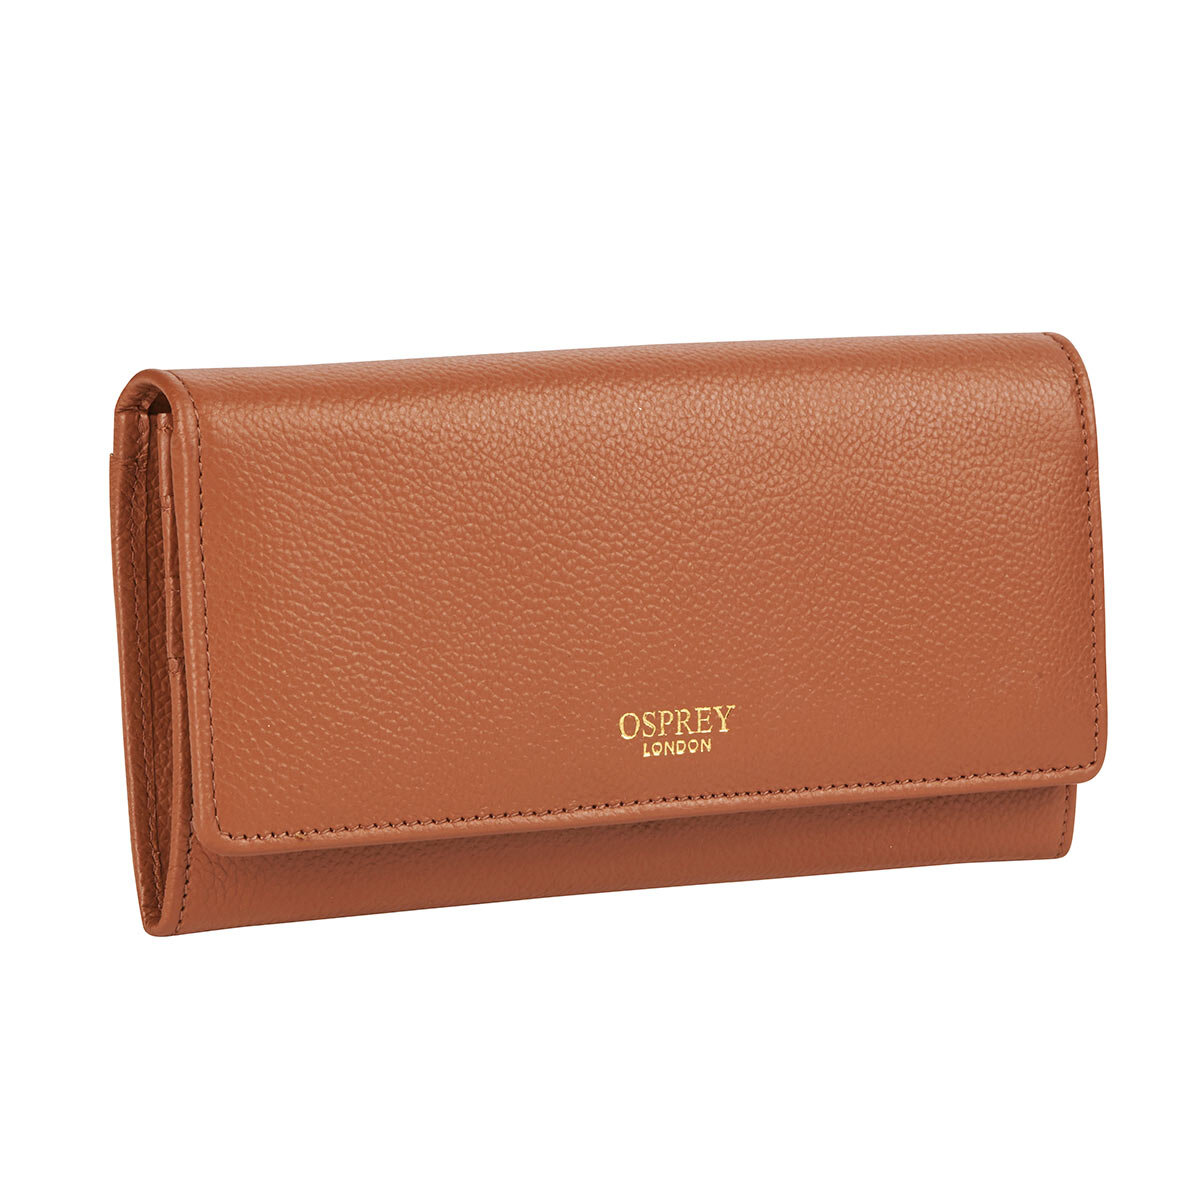 Osprey London Nappa Leather Women's Purse, Tan with Gift Box